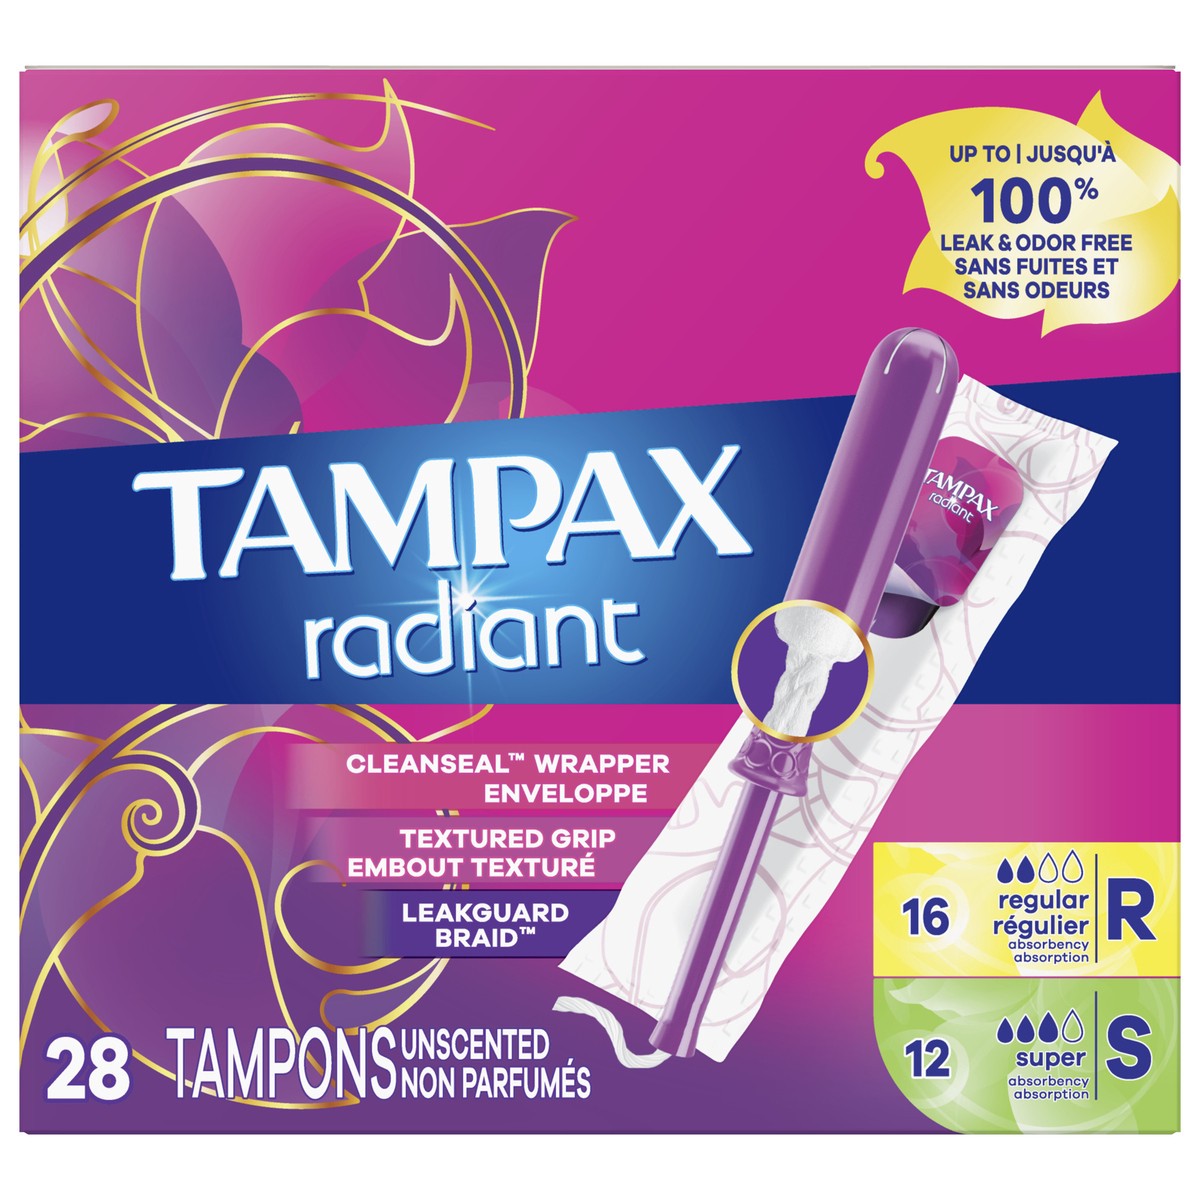 slide 1 of 104, Tampax Radiant Tampons Duo Pack with LeakGuard Braid, Regular/Super Absorbency, Unscented, 28 Count, 28 ct